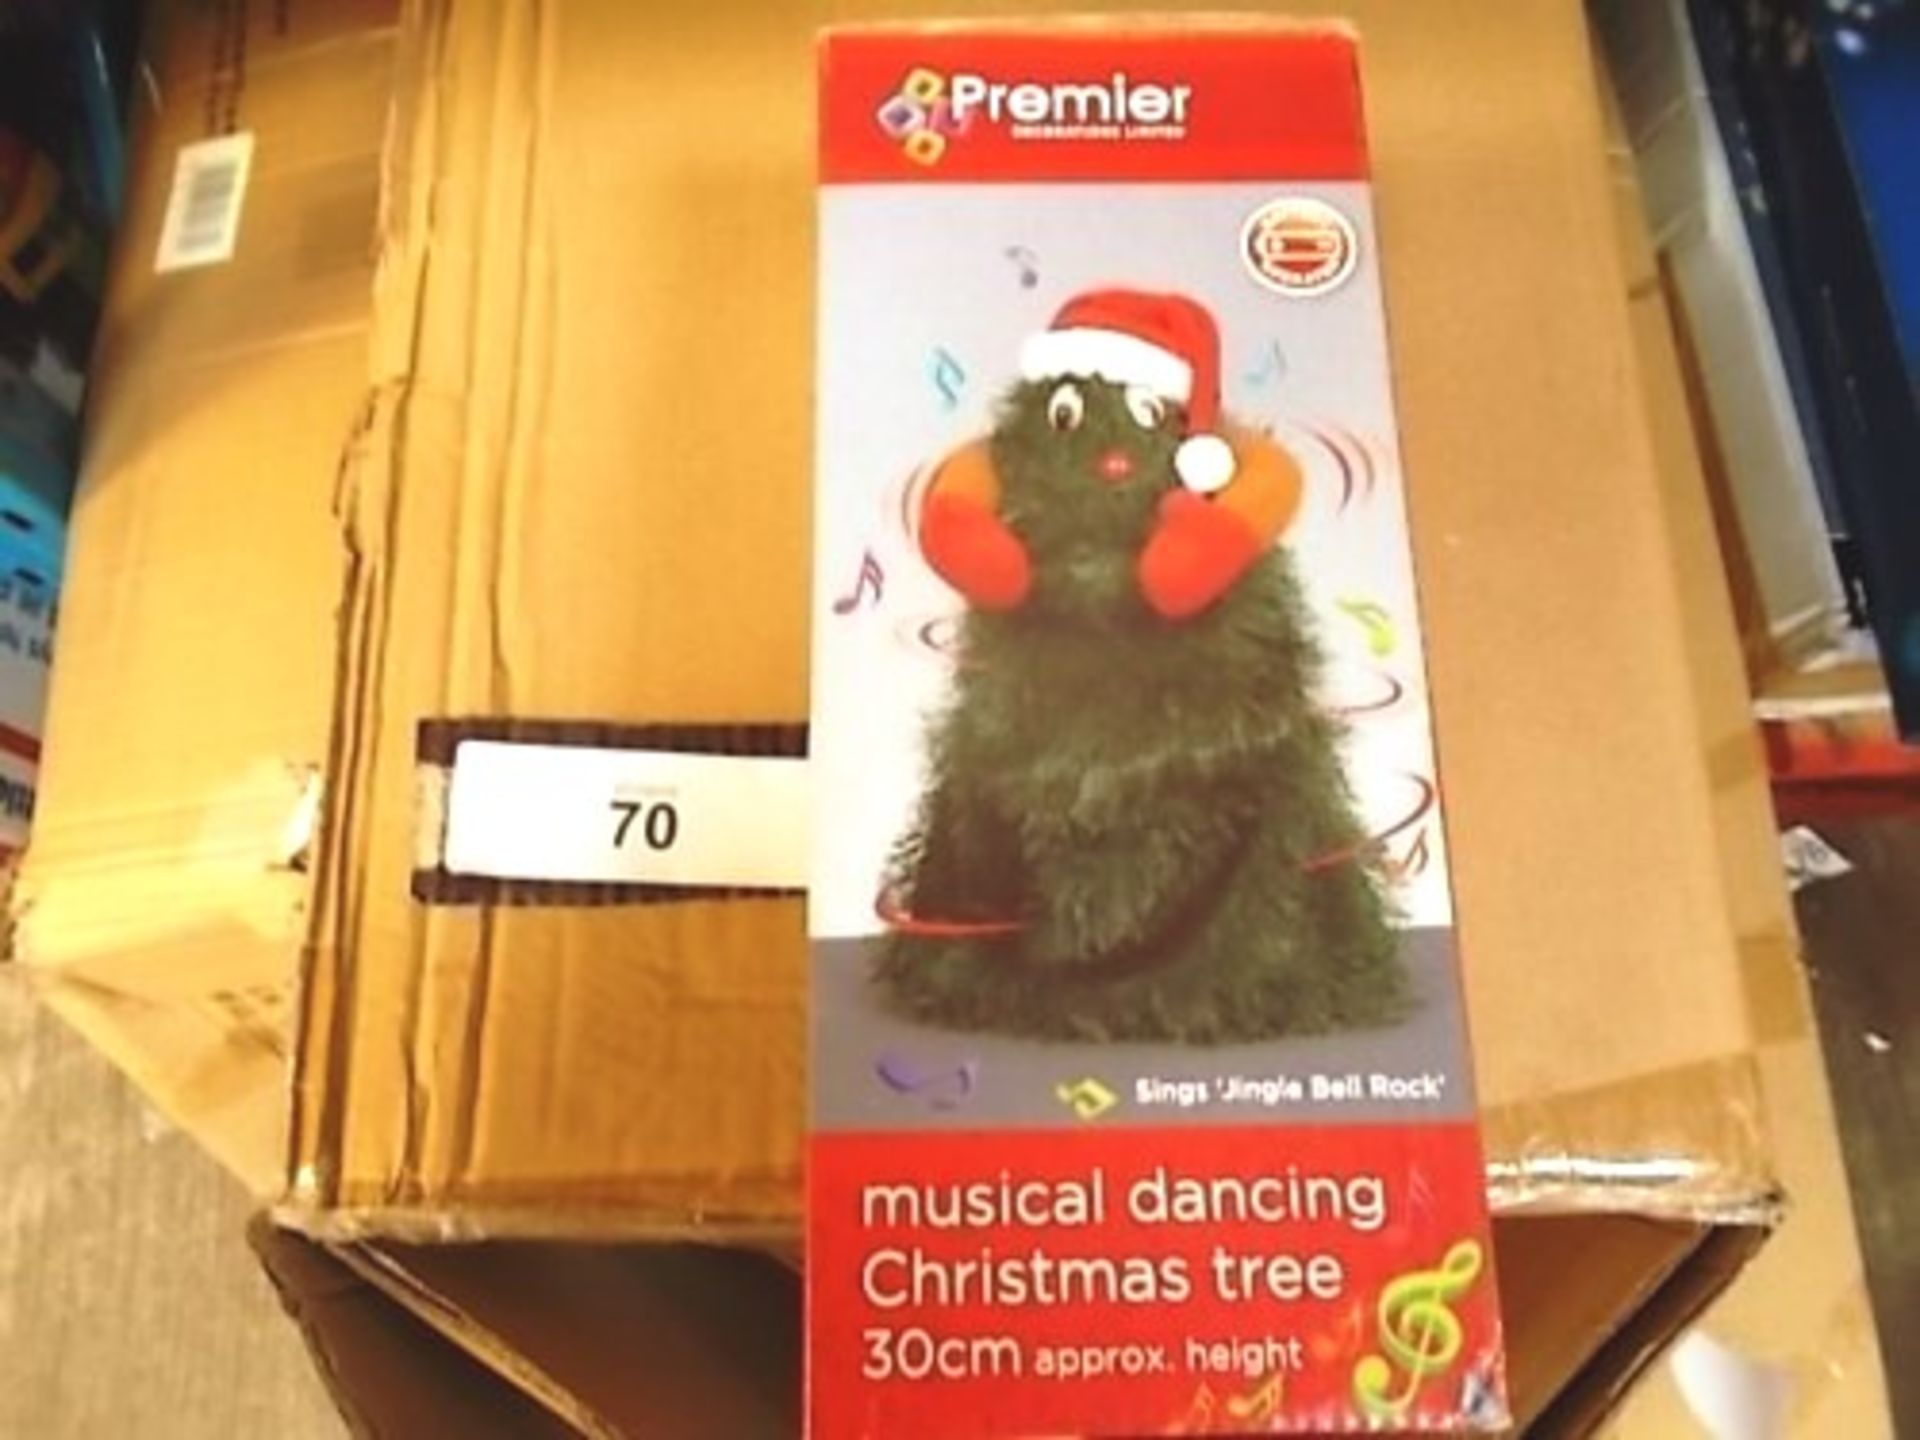 12 x Premier Decorations Ltd  musical dancing Christmas trees, approximately 30cm high, item no.